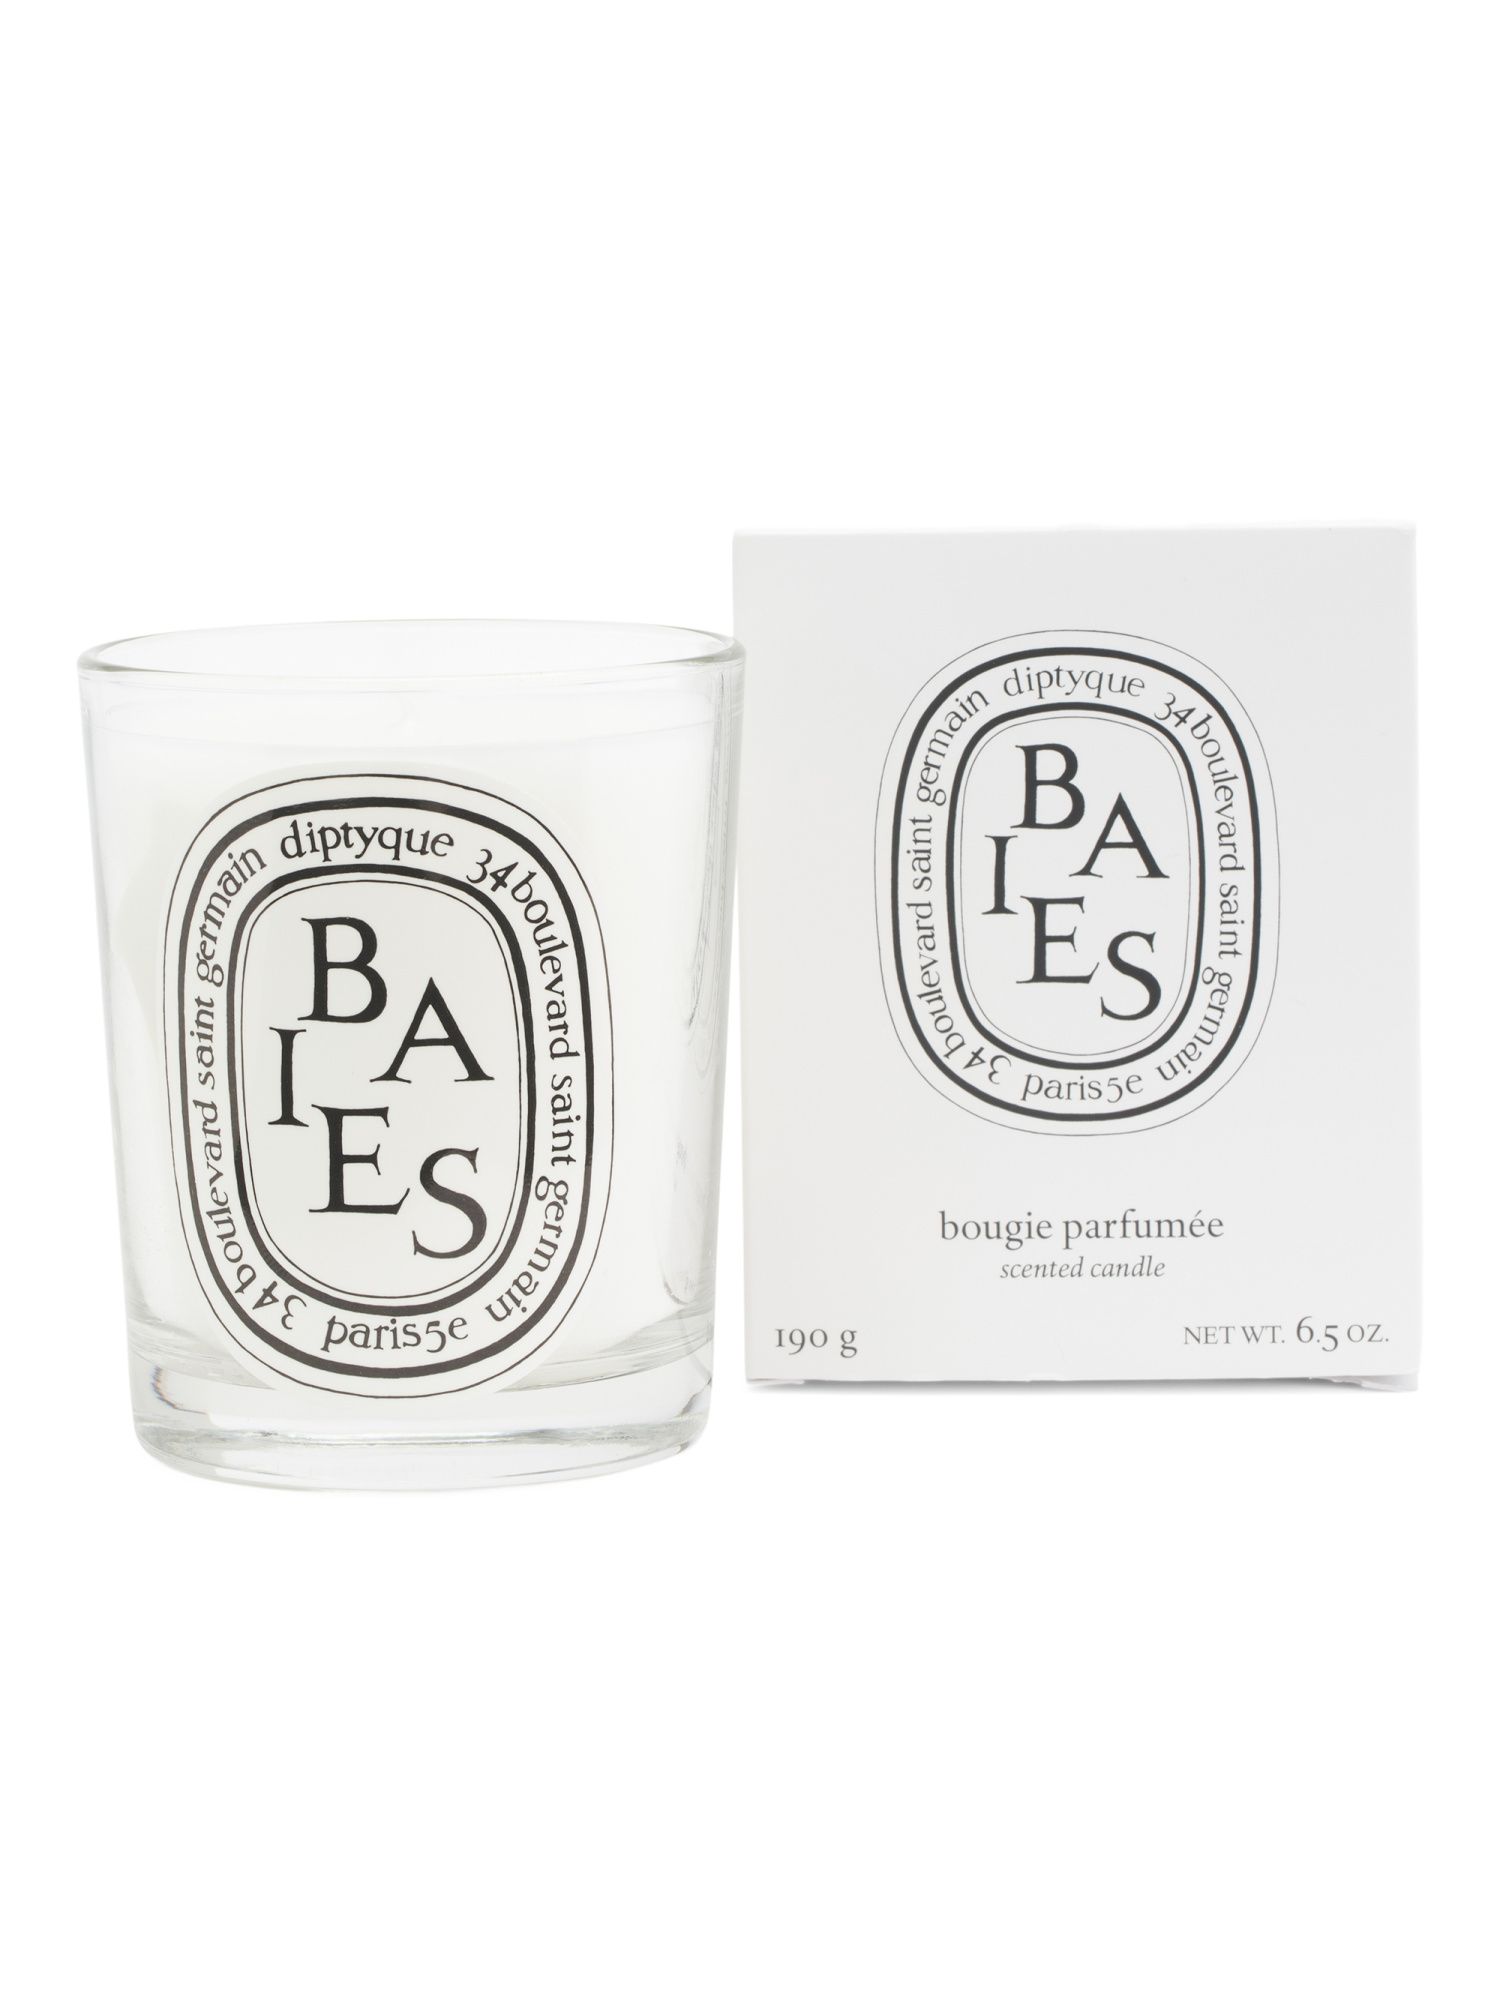 Made In France 6.5oz Baies Candle | TJ Maxx